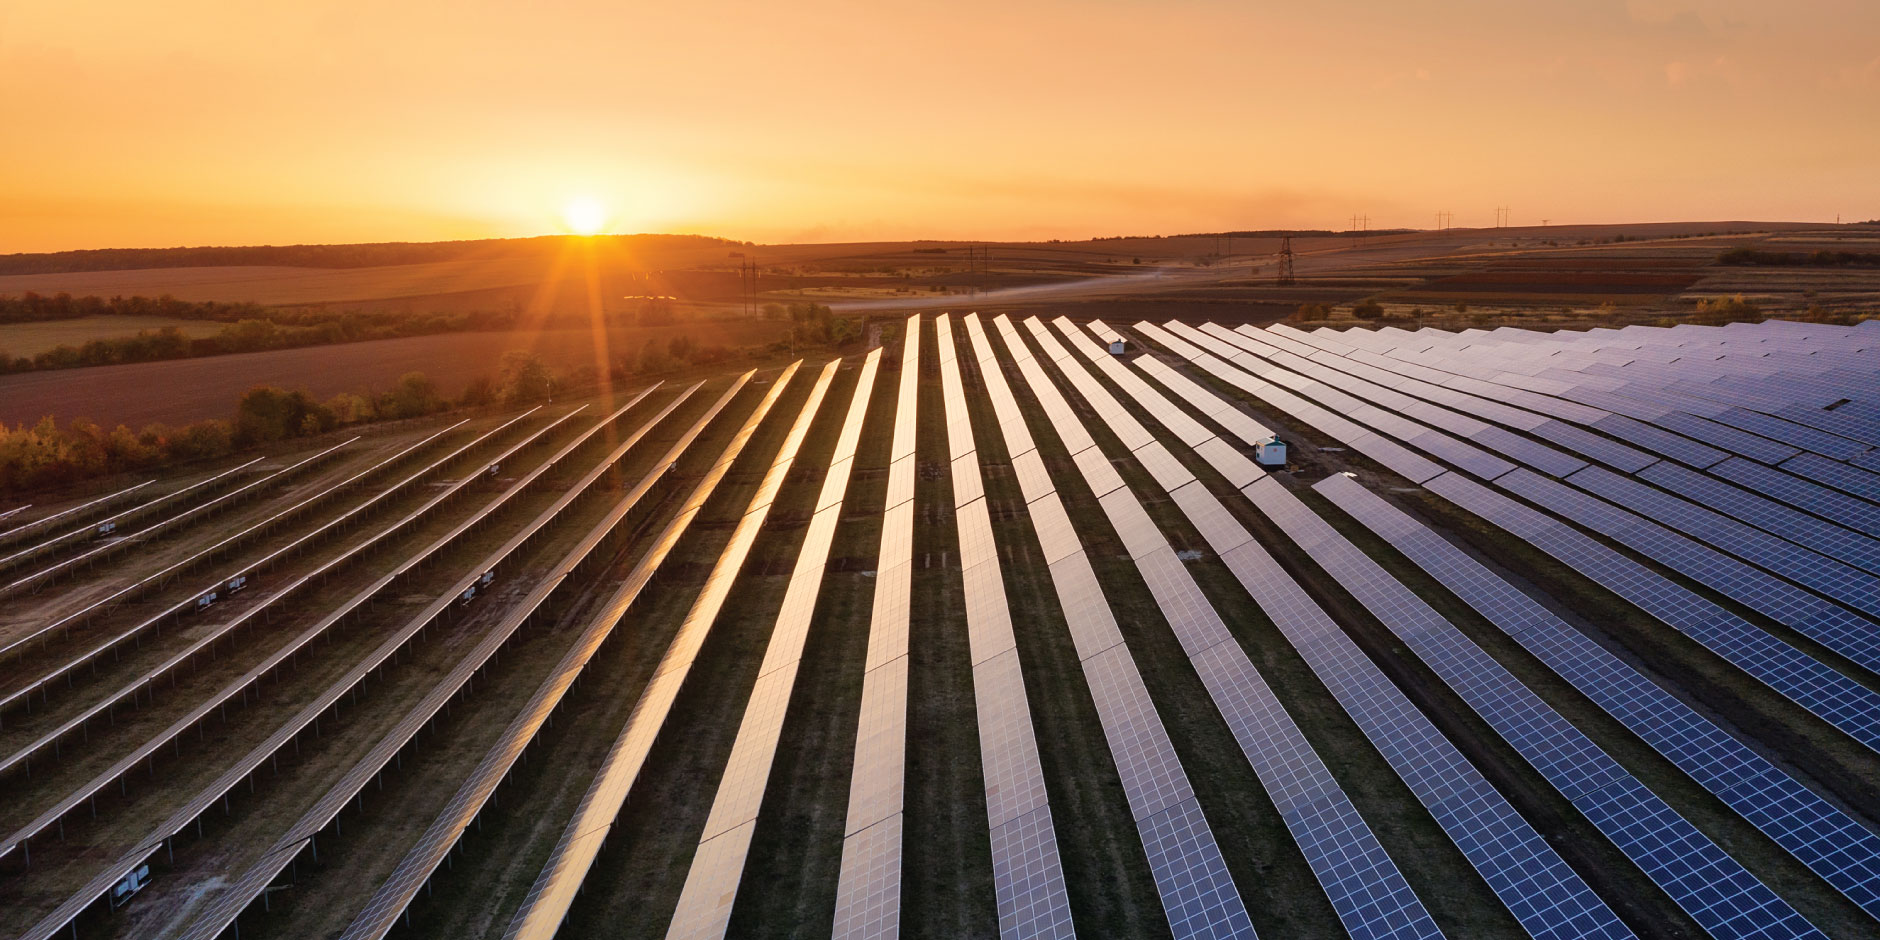 "Rows of solar panels in a field with the sunset in the background"